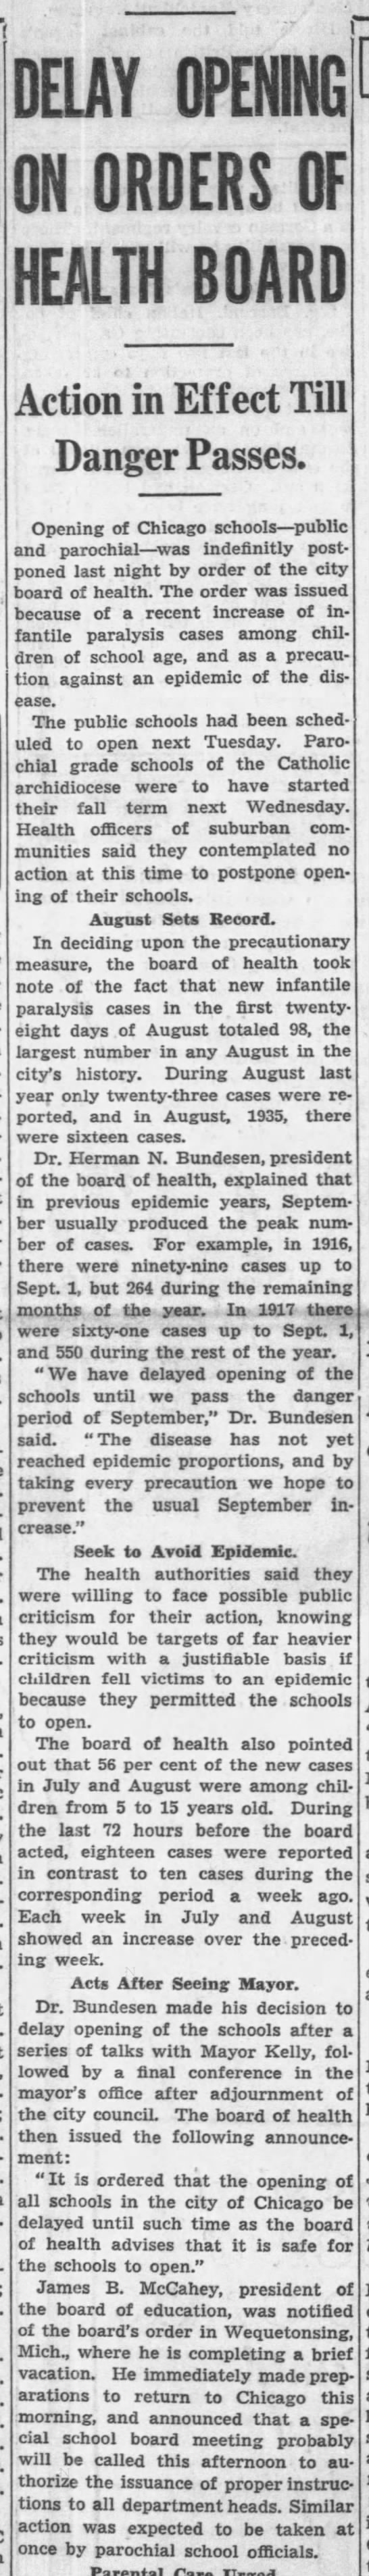 Delay Opening on Orders of Health Board. Chicago Tribune. 9.1.1937 - 